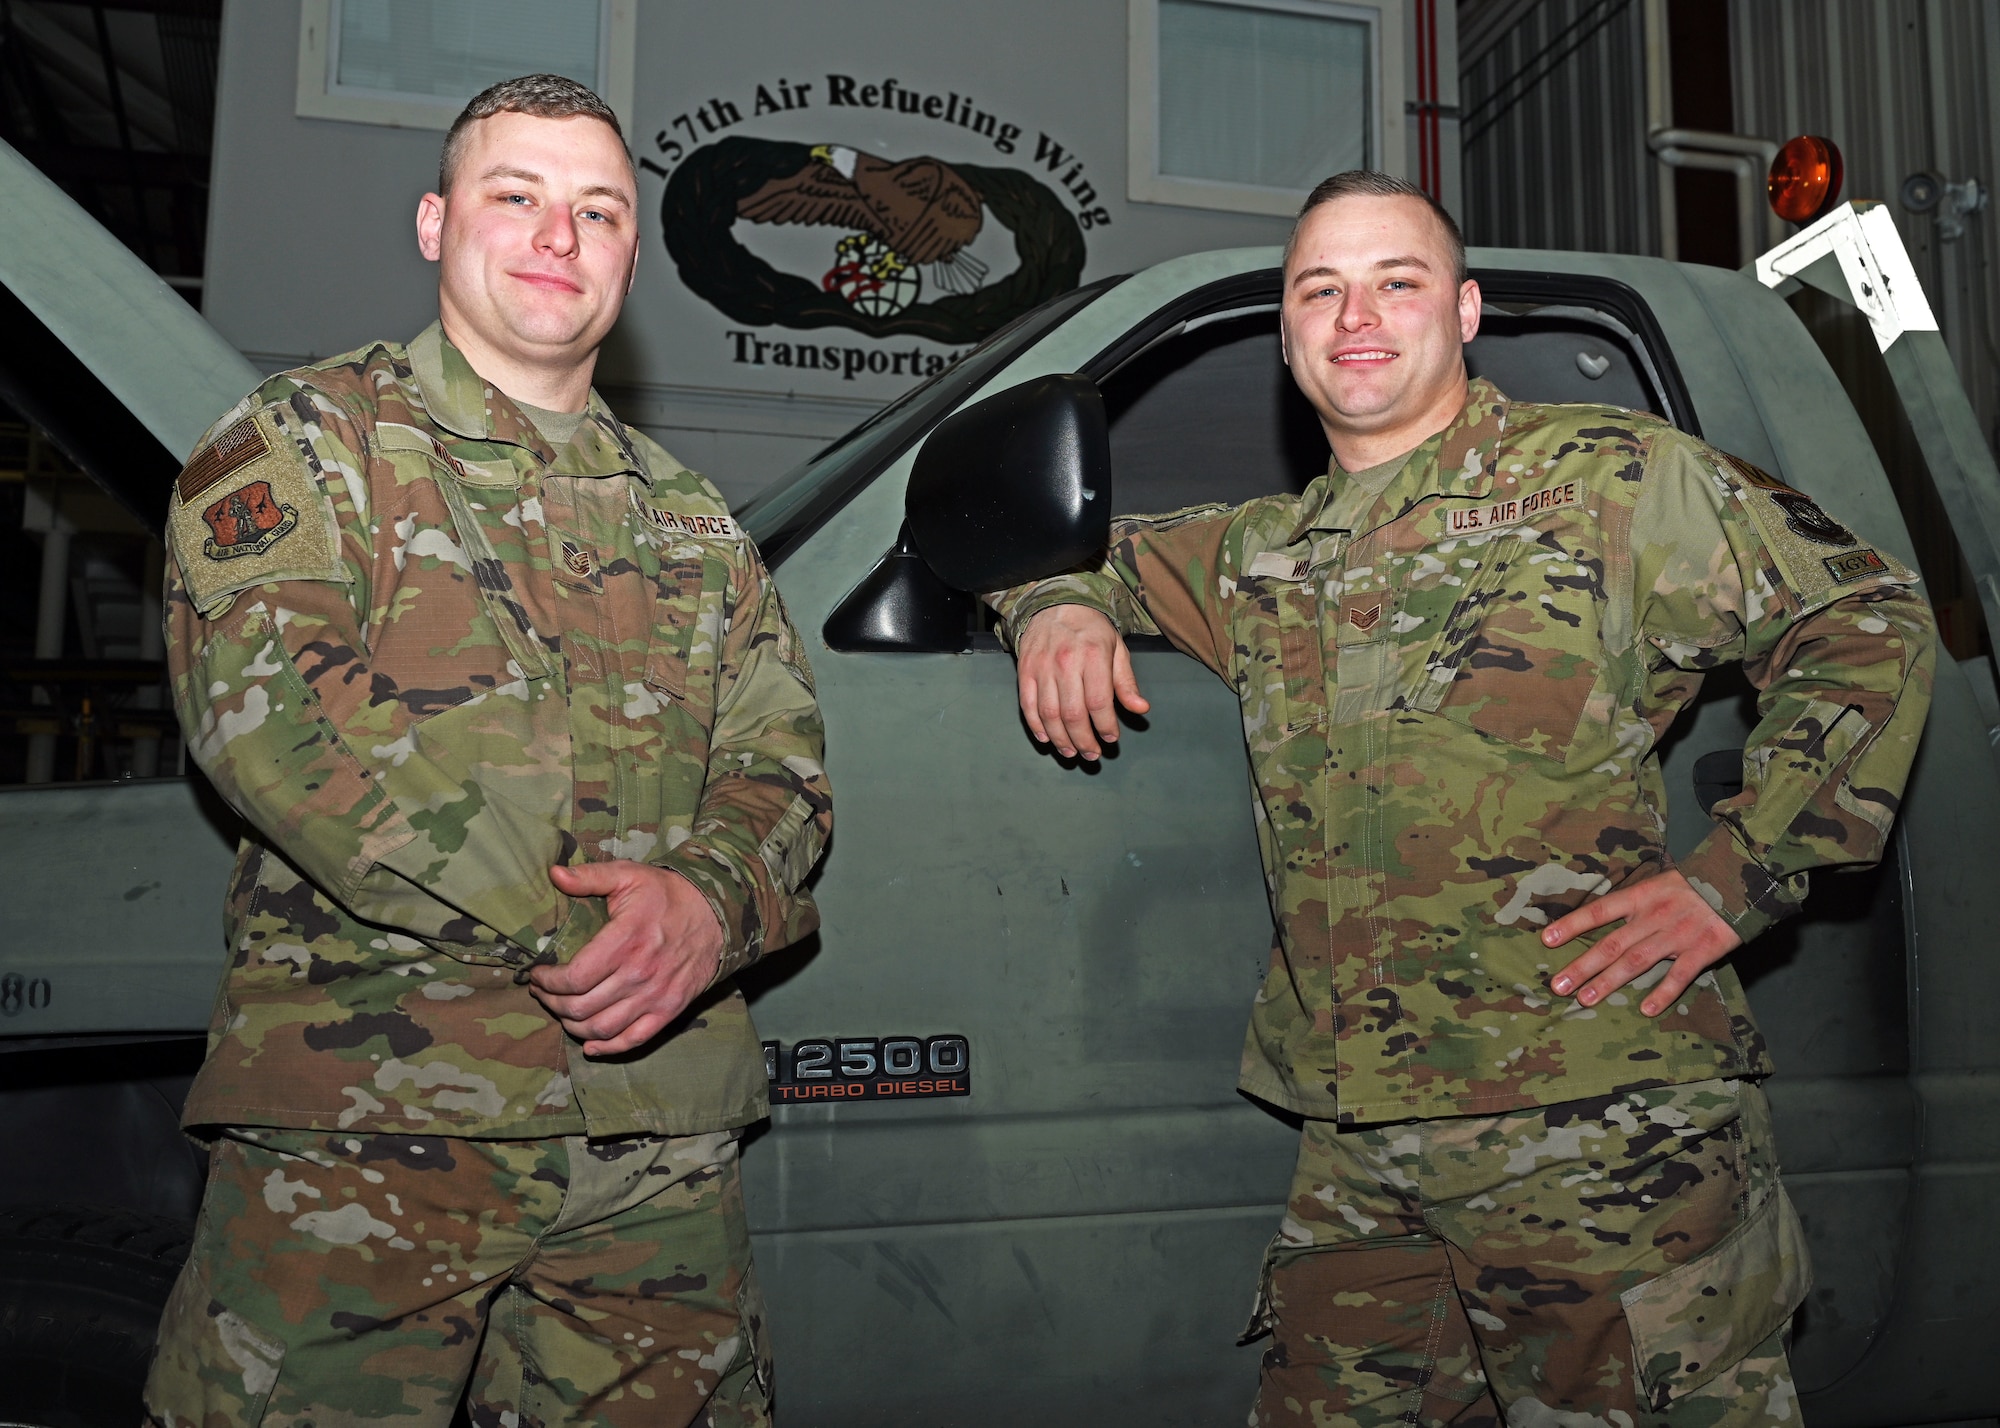 From left, Tech. Sgt. Sean Wood and Staff Sgt. Christopher Wood, vehicle maintainers with the 157th Air Refueling Wing, pose in their flight maintenance facility Dec. 15, 2021, at Pease Air National Guard Base.